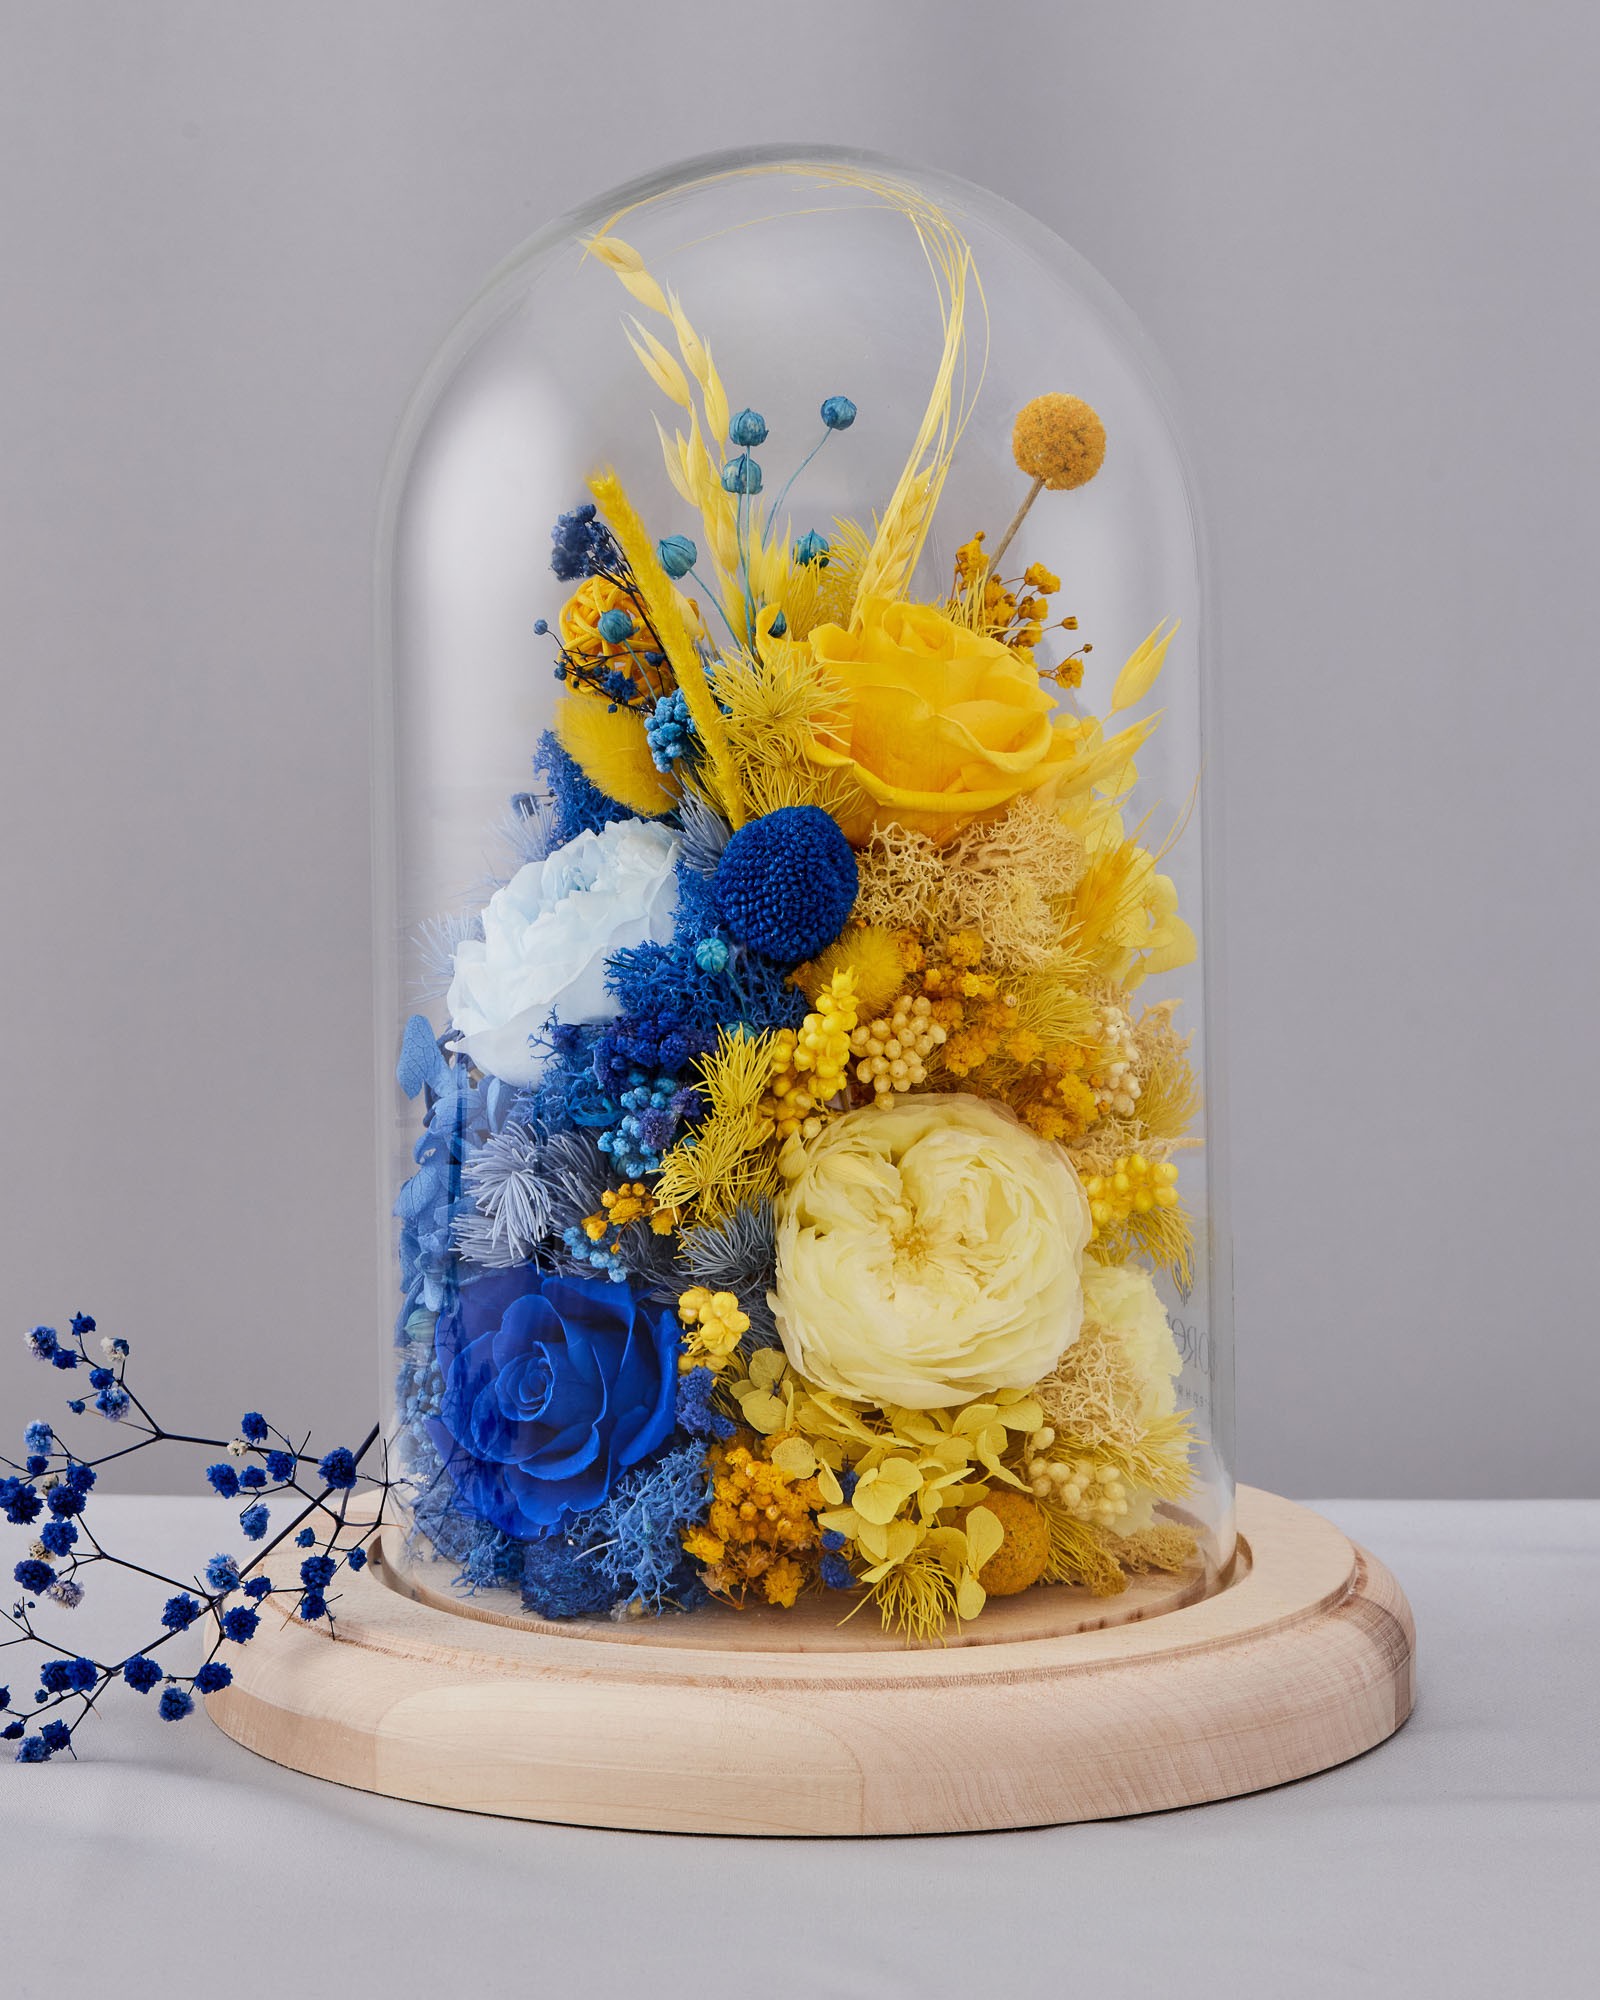 Flowers in glass dome "Independence Day"